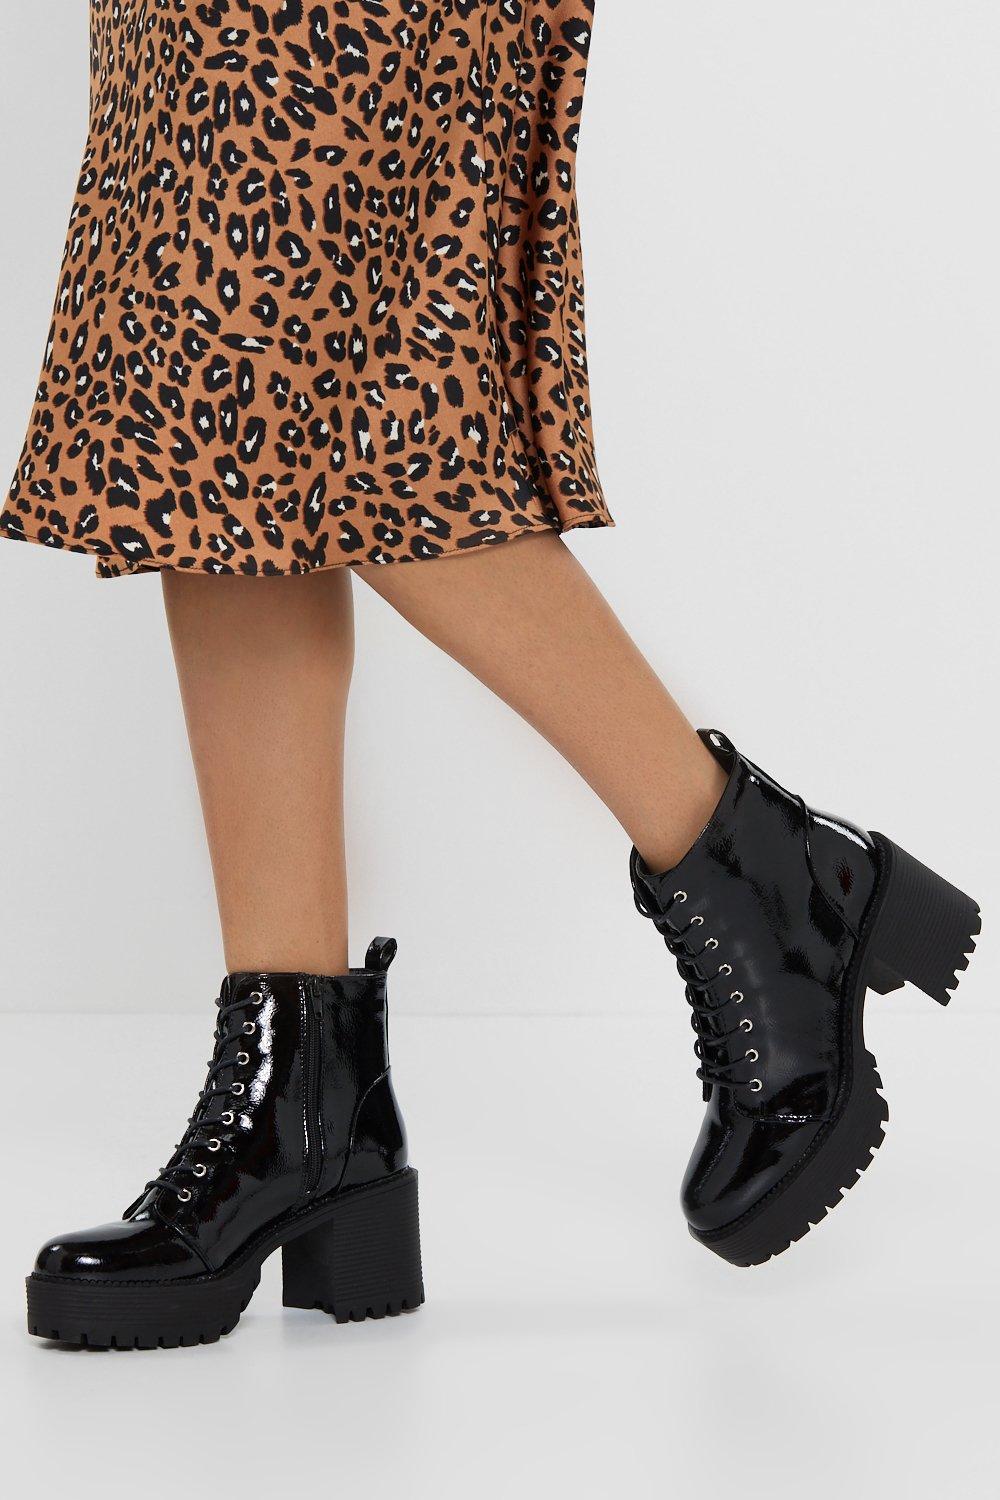 Stand Firm Patent Chunky Boots | Nasty Gal